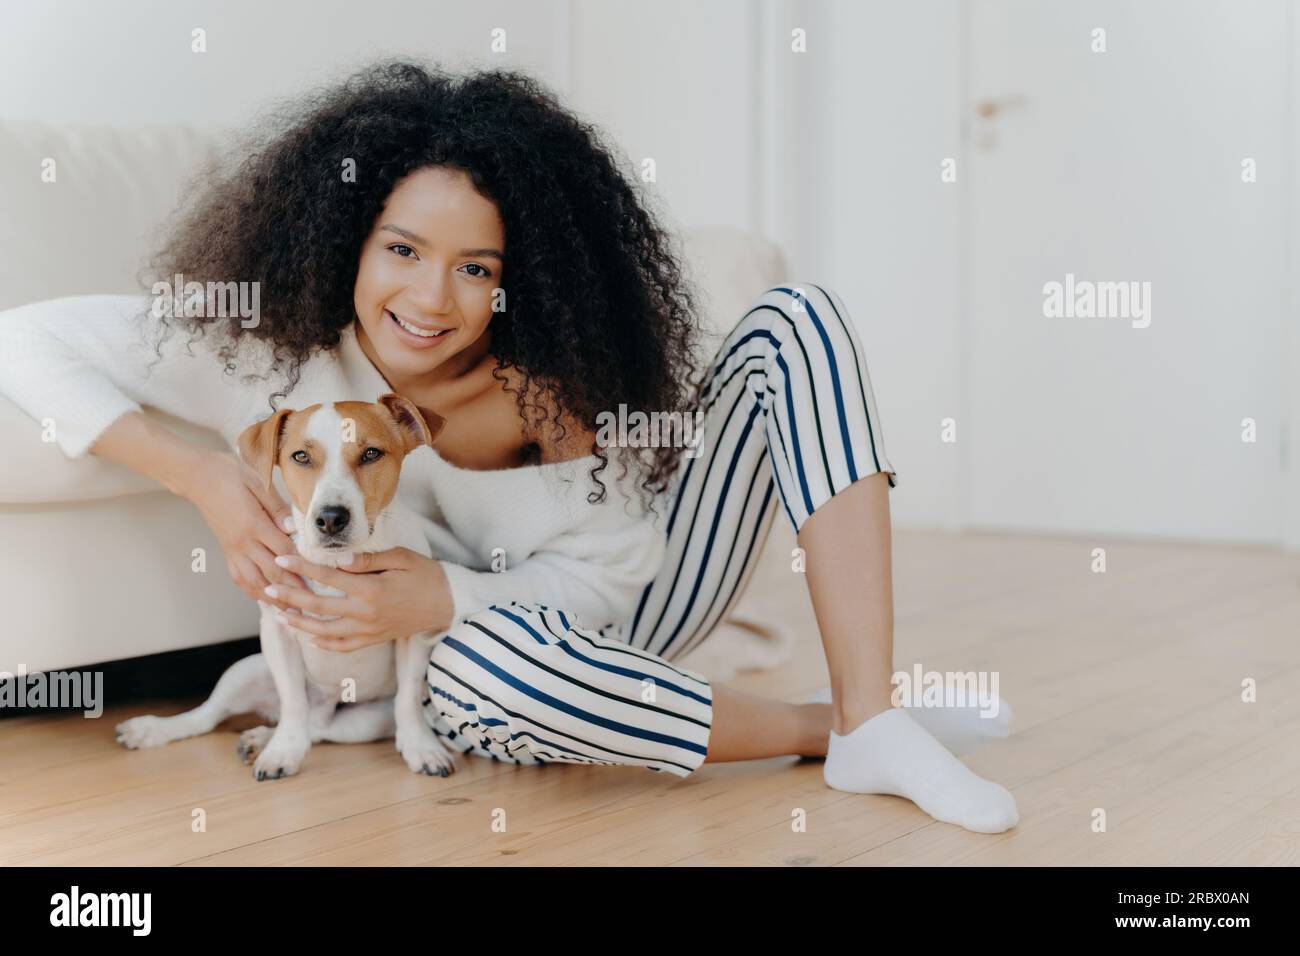 Curly-haired model poses indoors with beloved Jack Russell Terrier. Tender embrace, sitting on floor near comfy sofa. Cherishing time together. Stock Photo